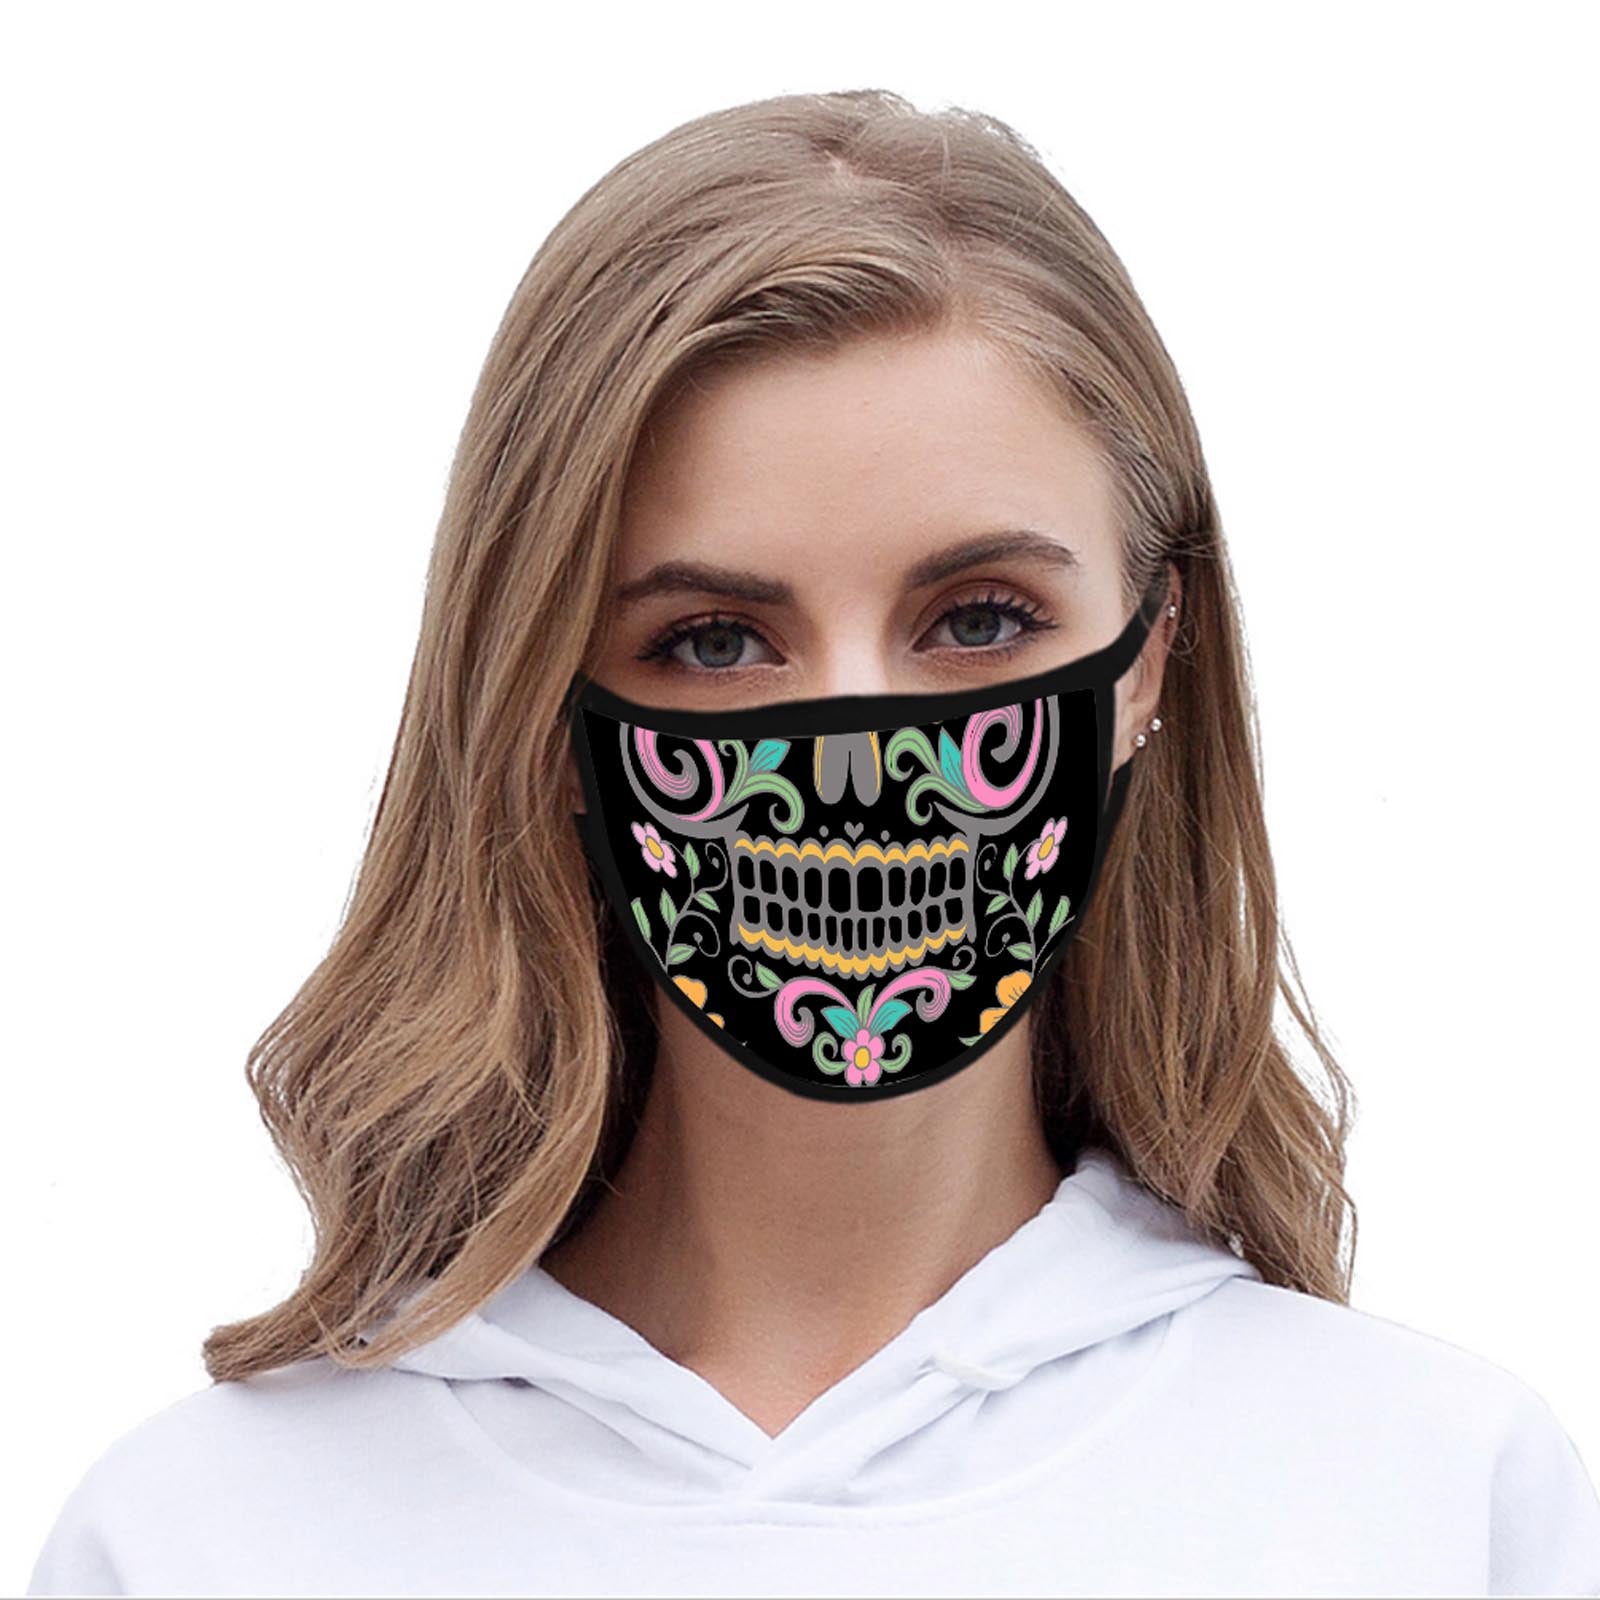 FCM-015 American Bling Black Floral Sugar Skull Fabric Face Mask Double Layer Set of 2